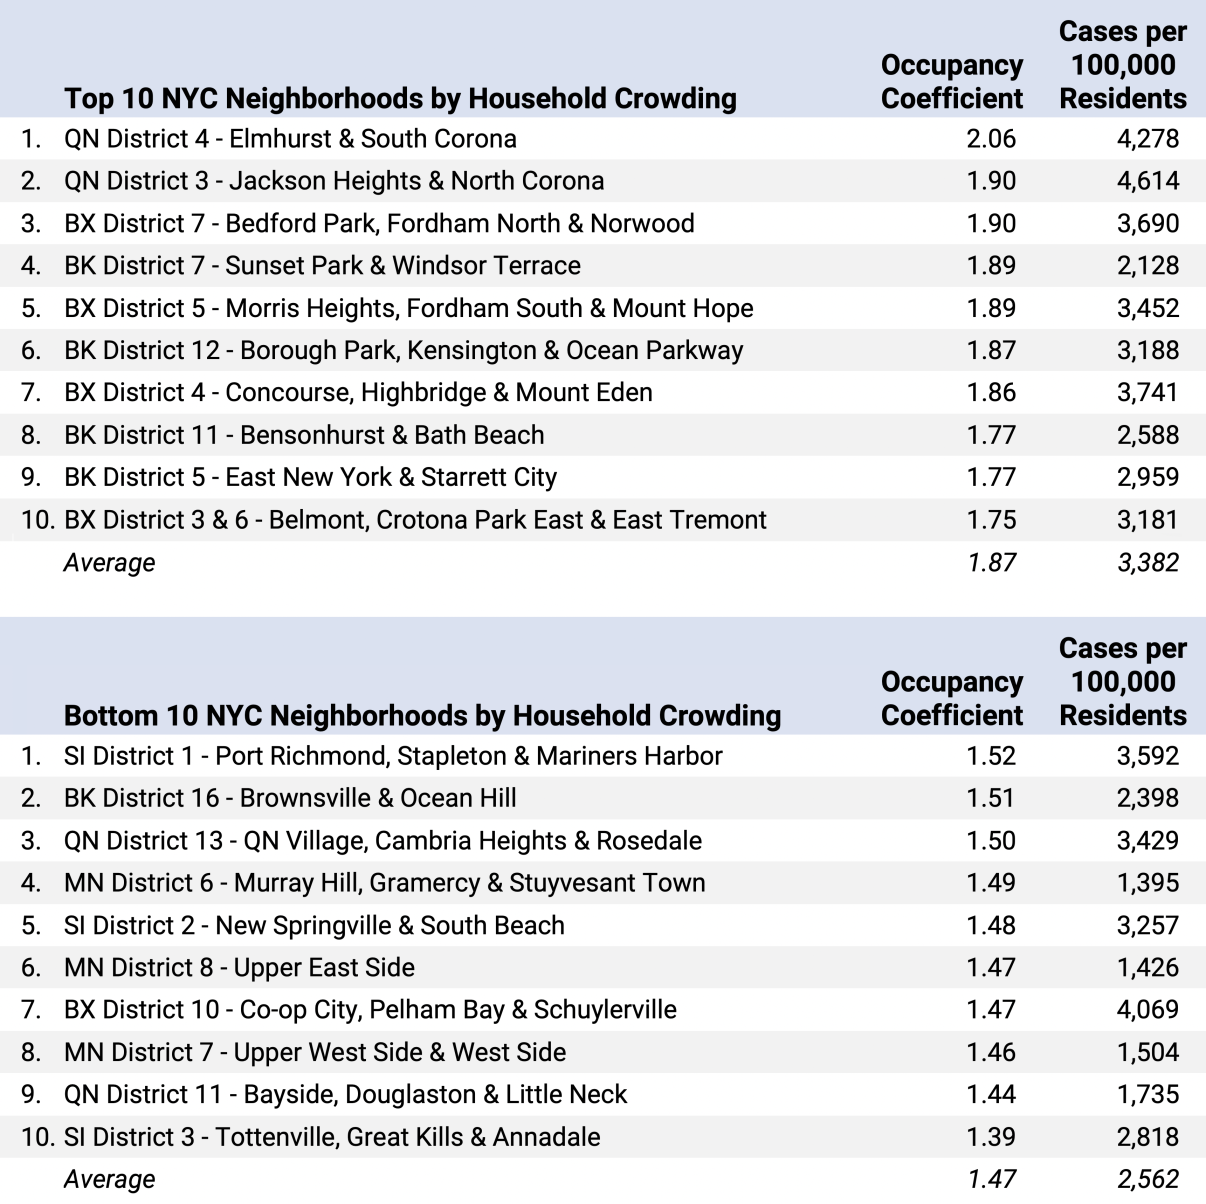 Table 2. Top and Bottom 10 NYC Neighborhoods by Household Crowding